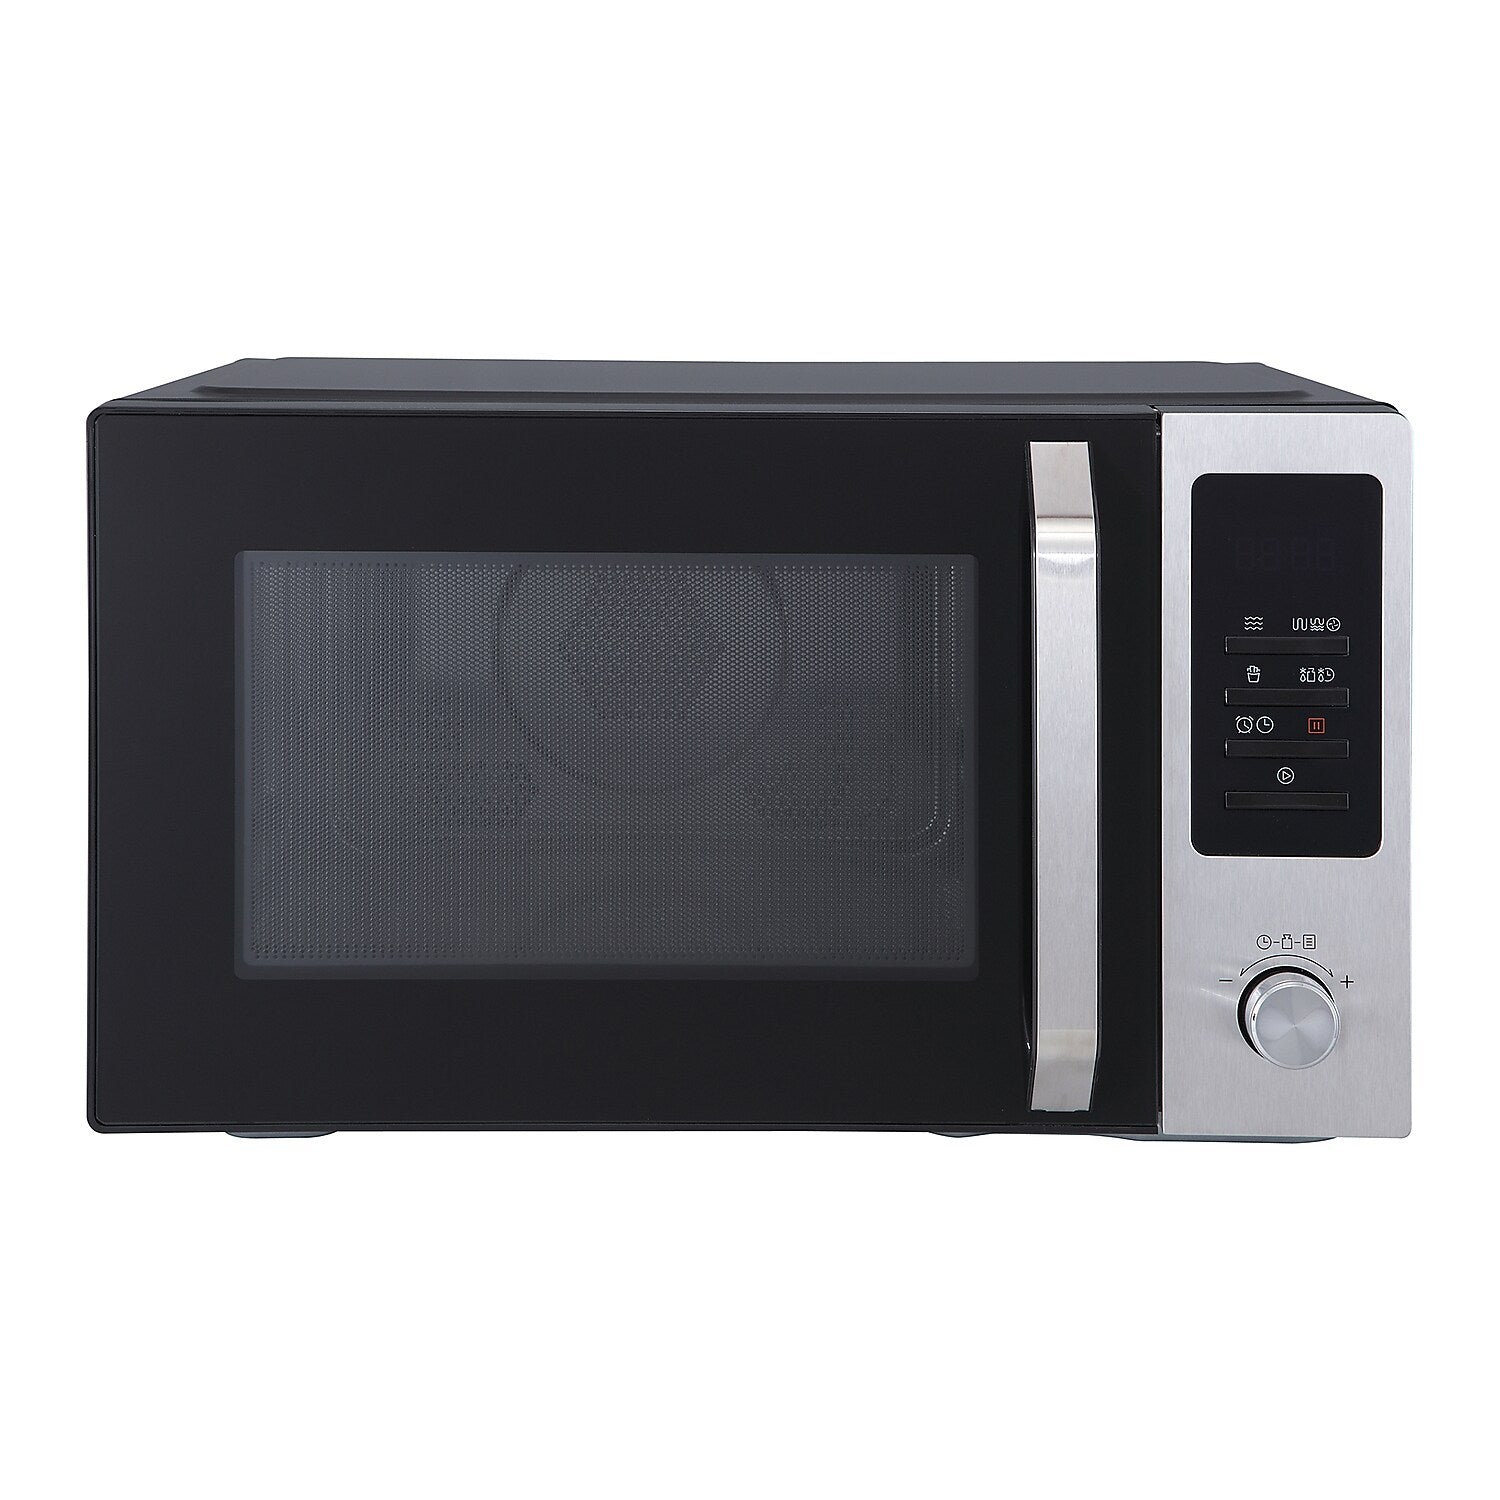 Magic Chef 1-Cu. Ft. 1000W Countertop Microwave with Air Fryer, Stainless Steel